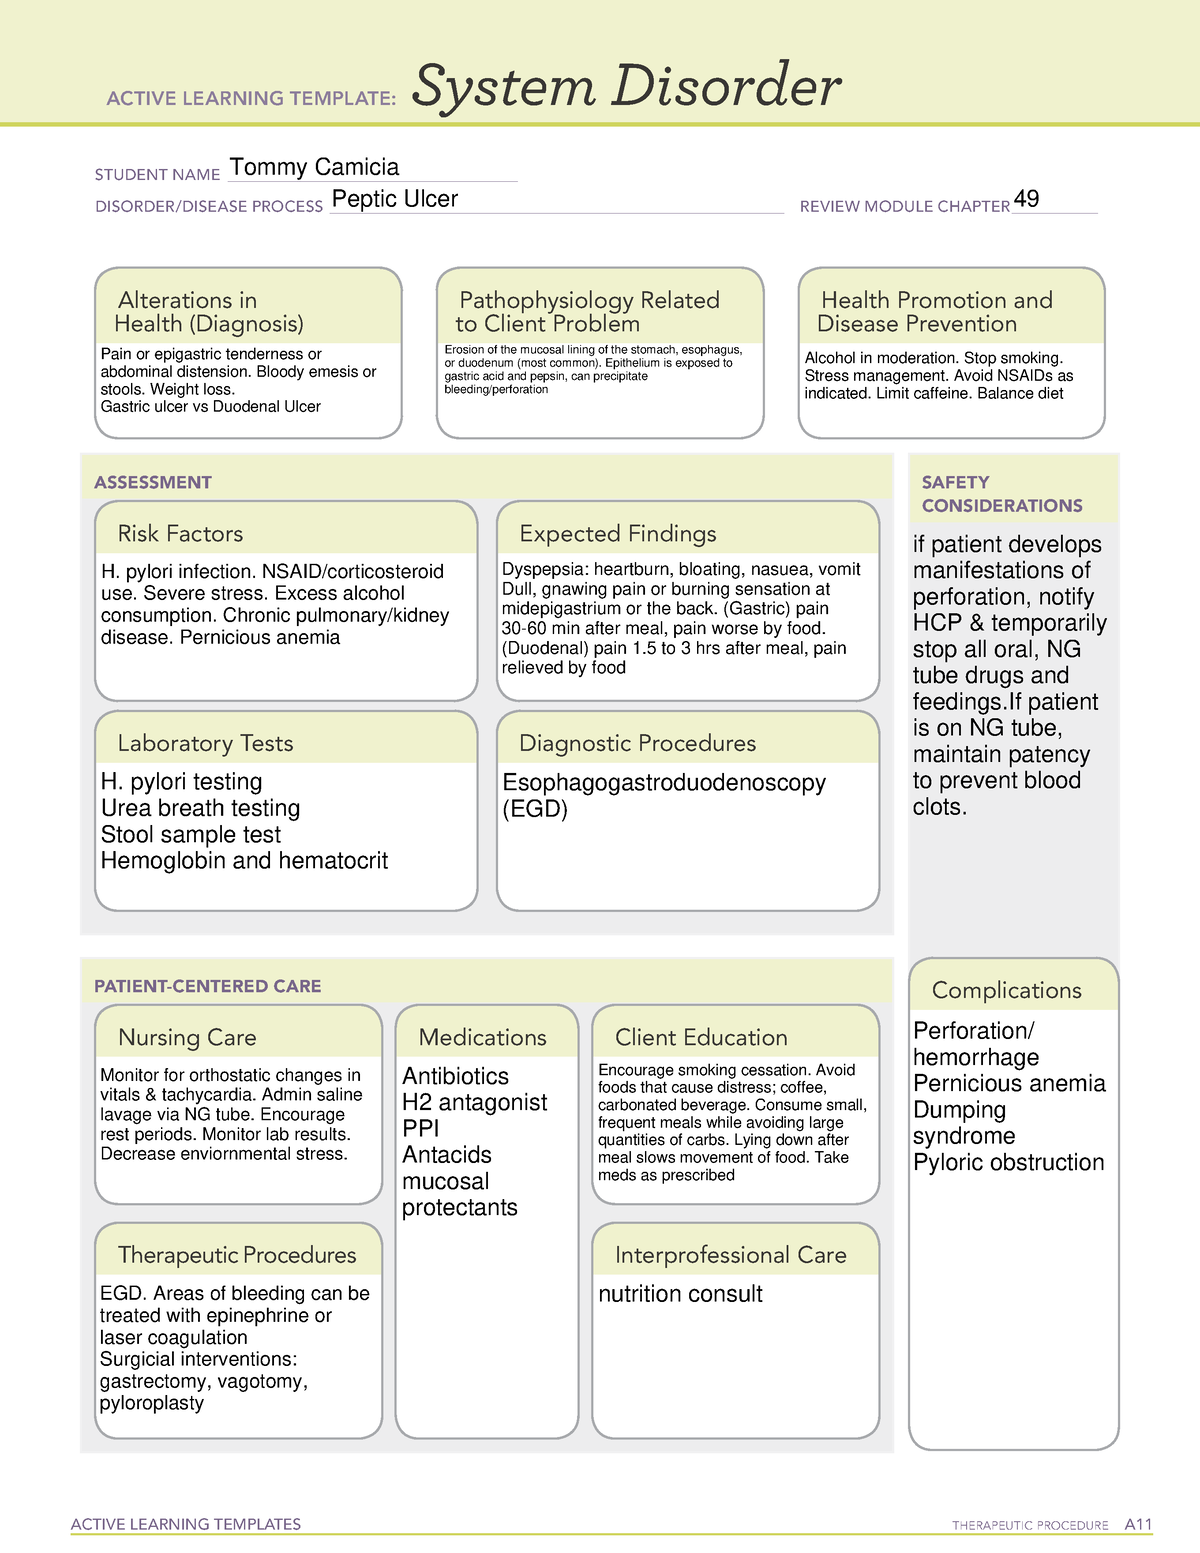 ATI template System disorder Peptic ulcer - ACTIVE LEARNING TEMPLATES ...